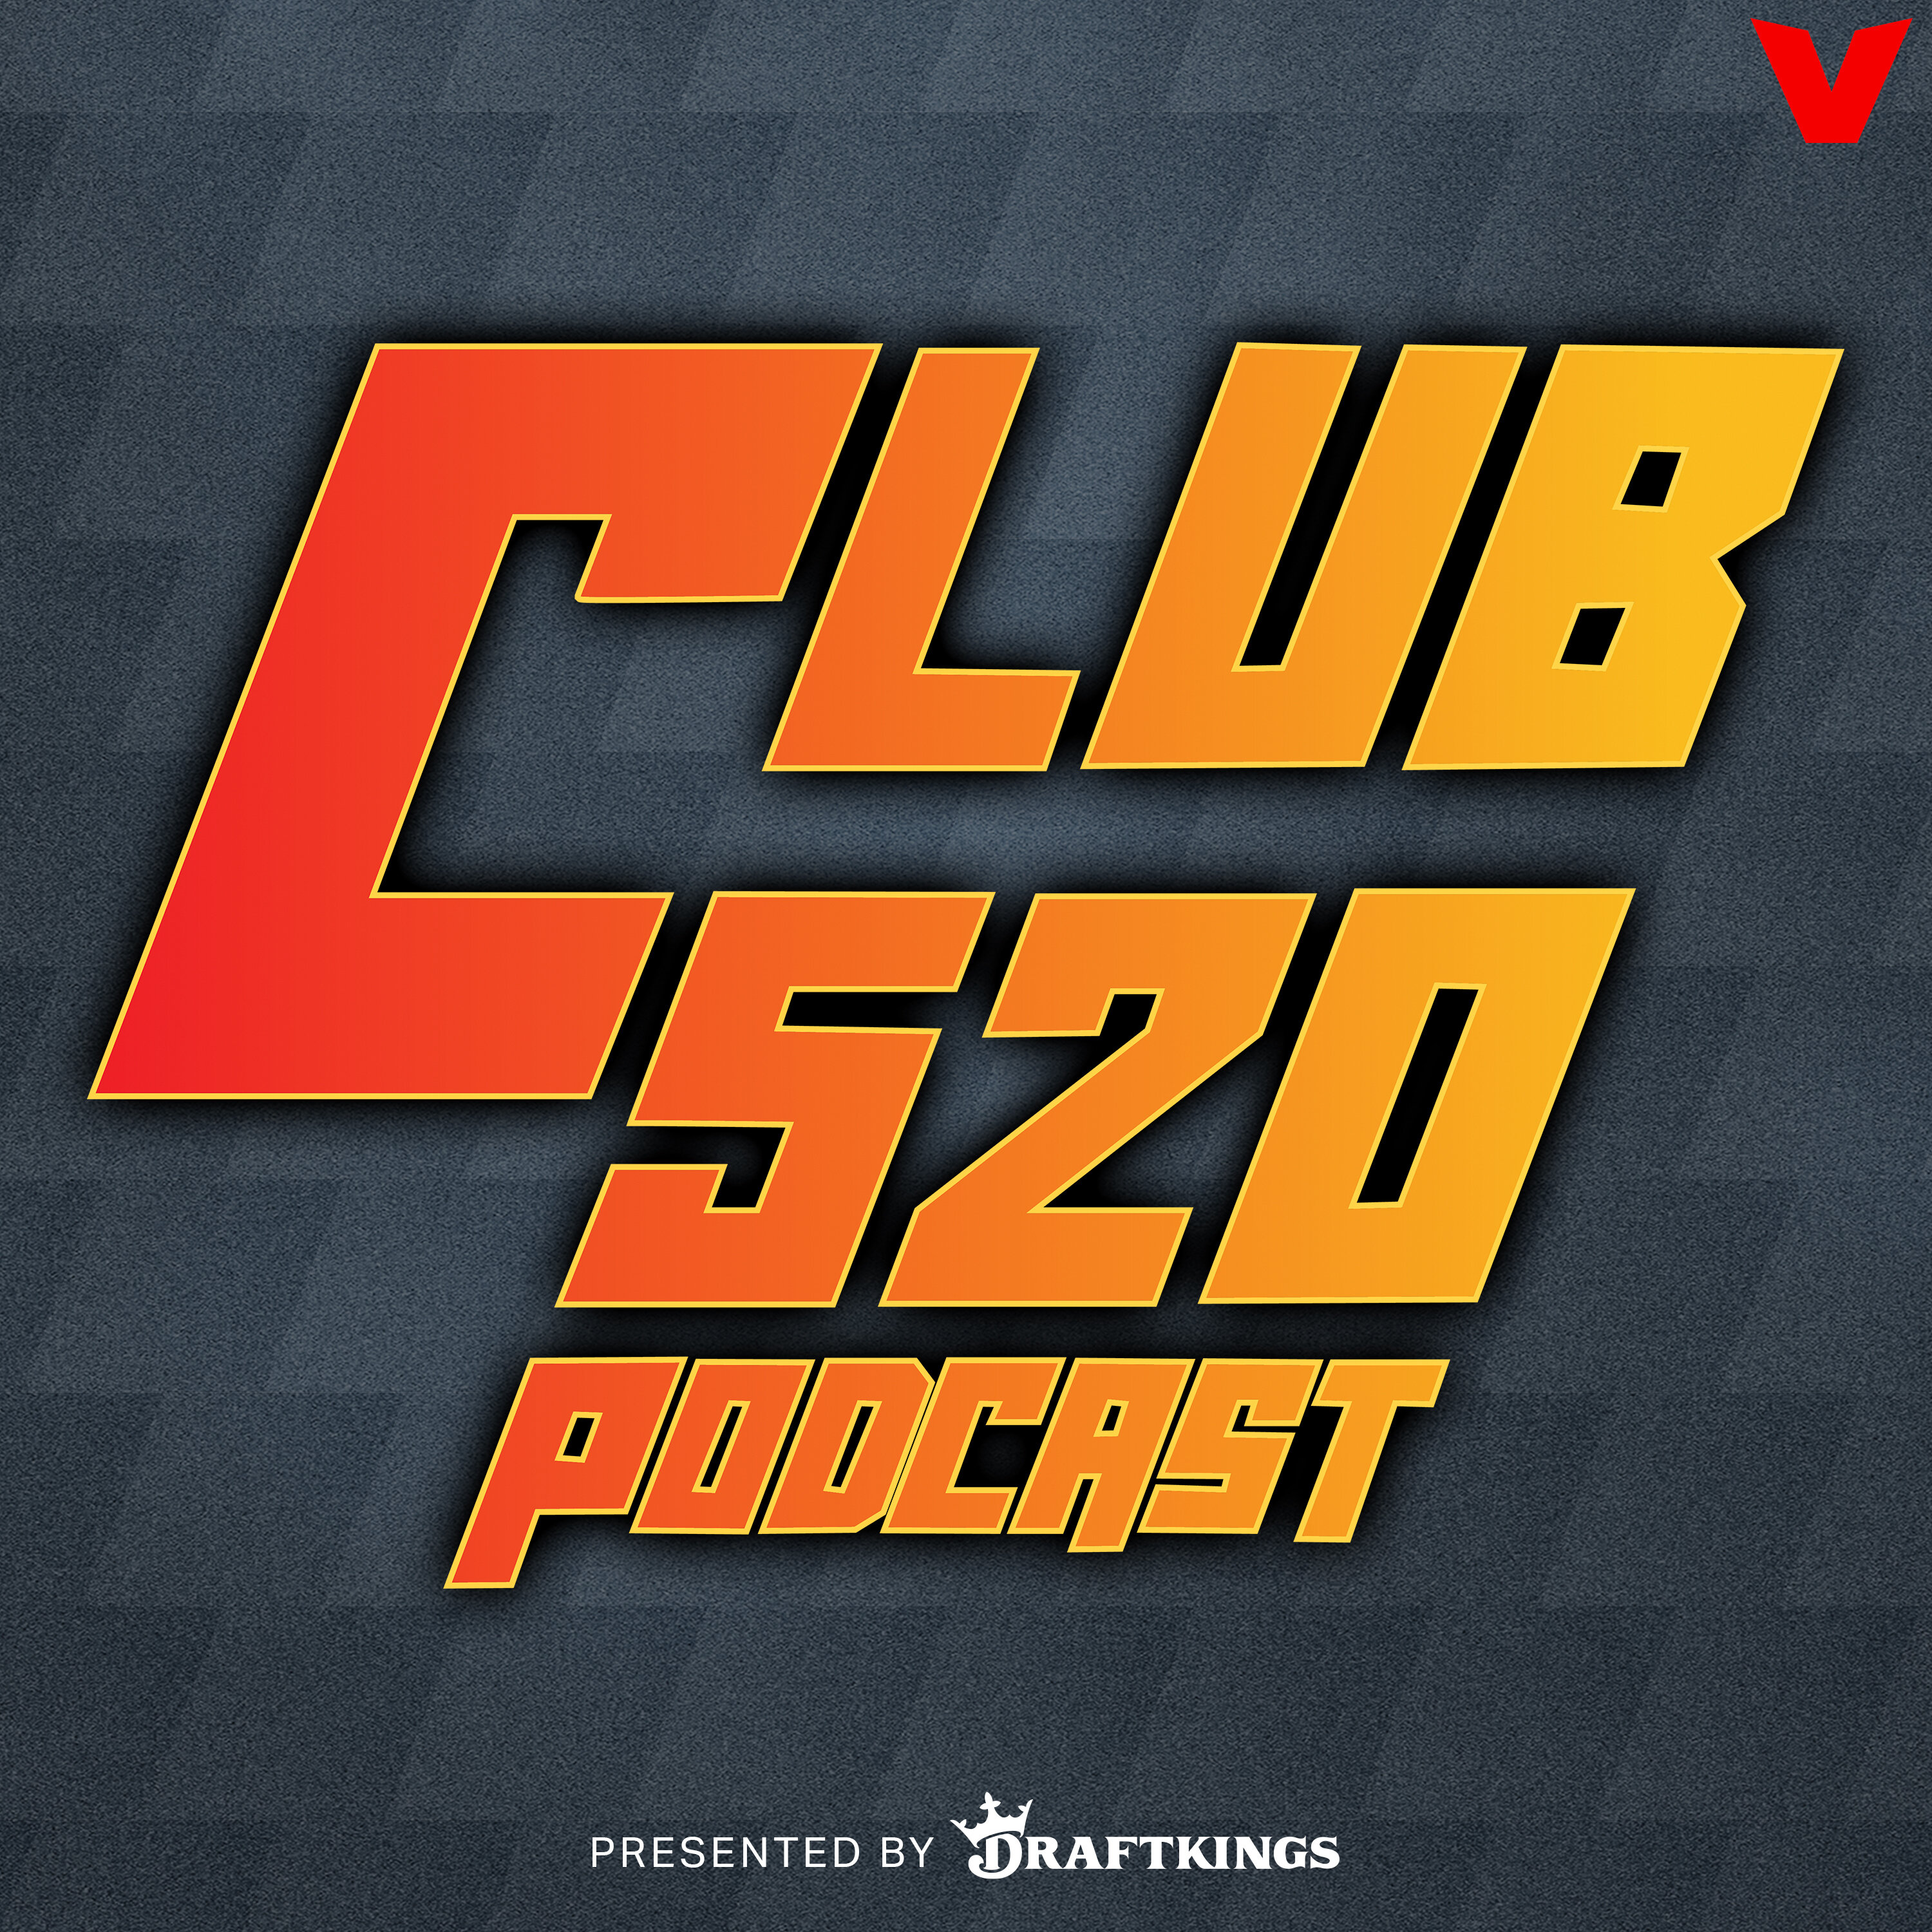 Club 520 - Jeff Teague on KAT dropping 60, All-Star predictions, did Giannis FIRE his coach?